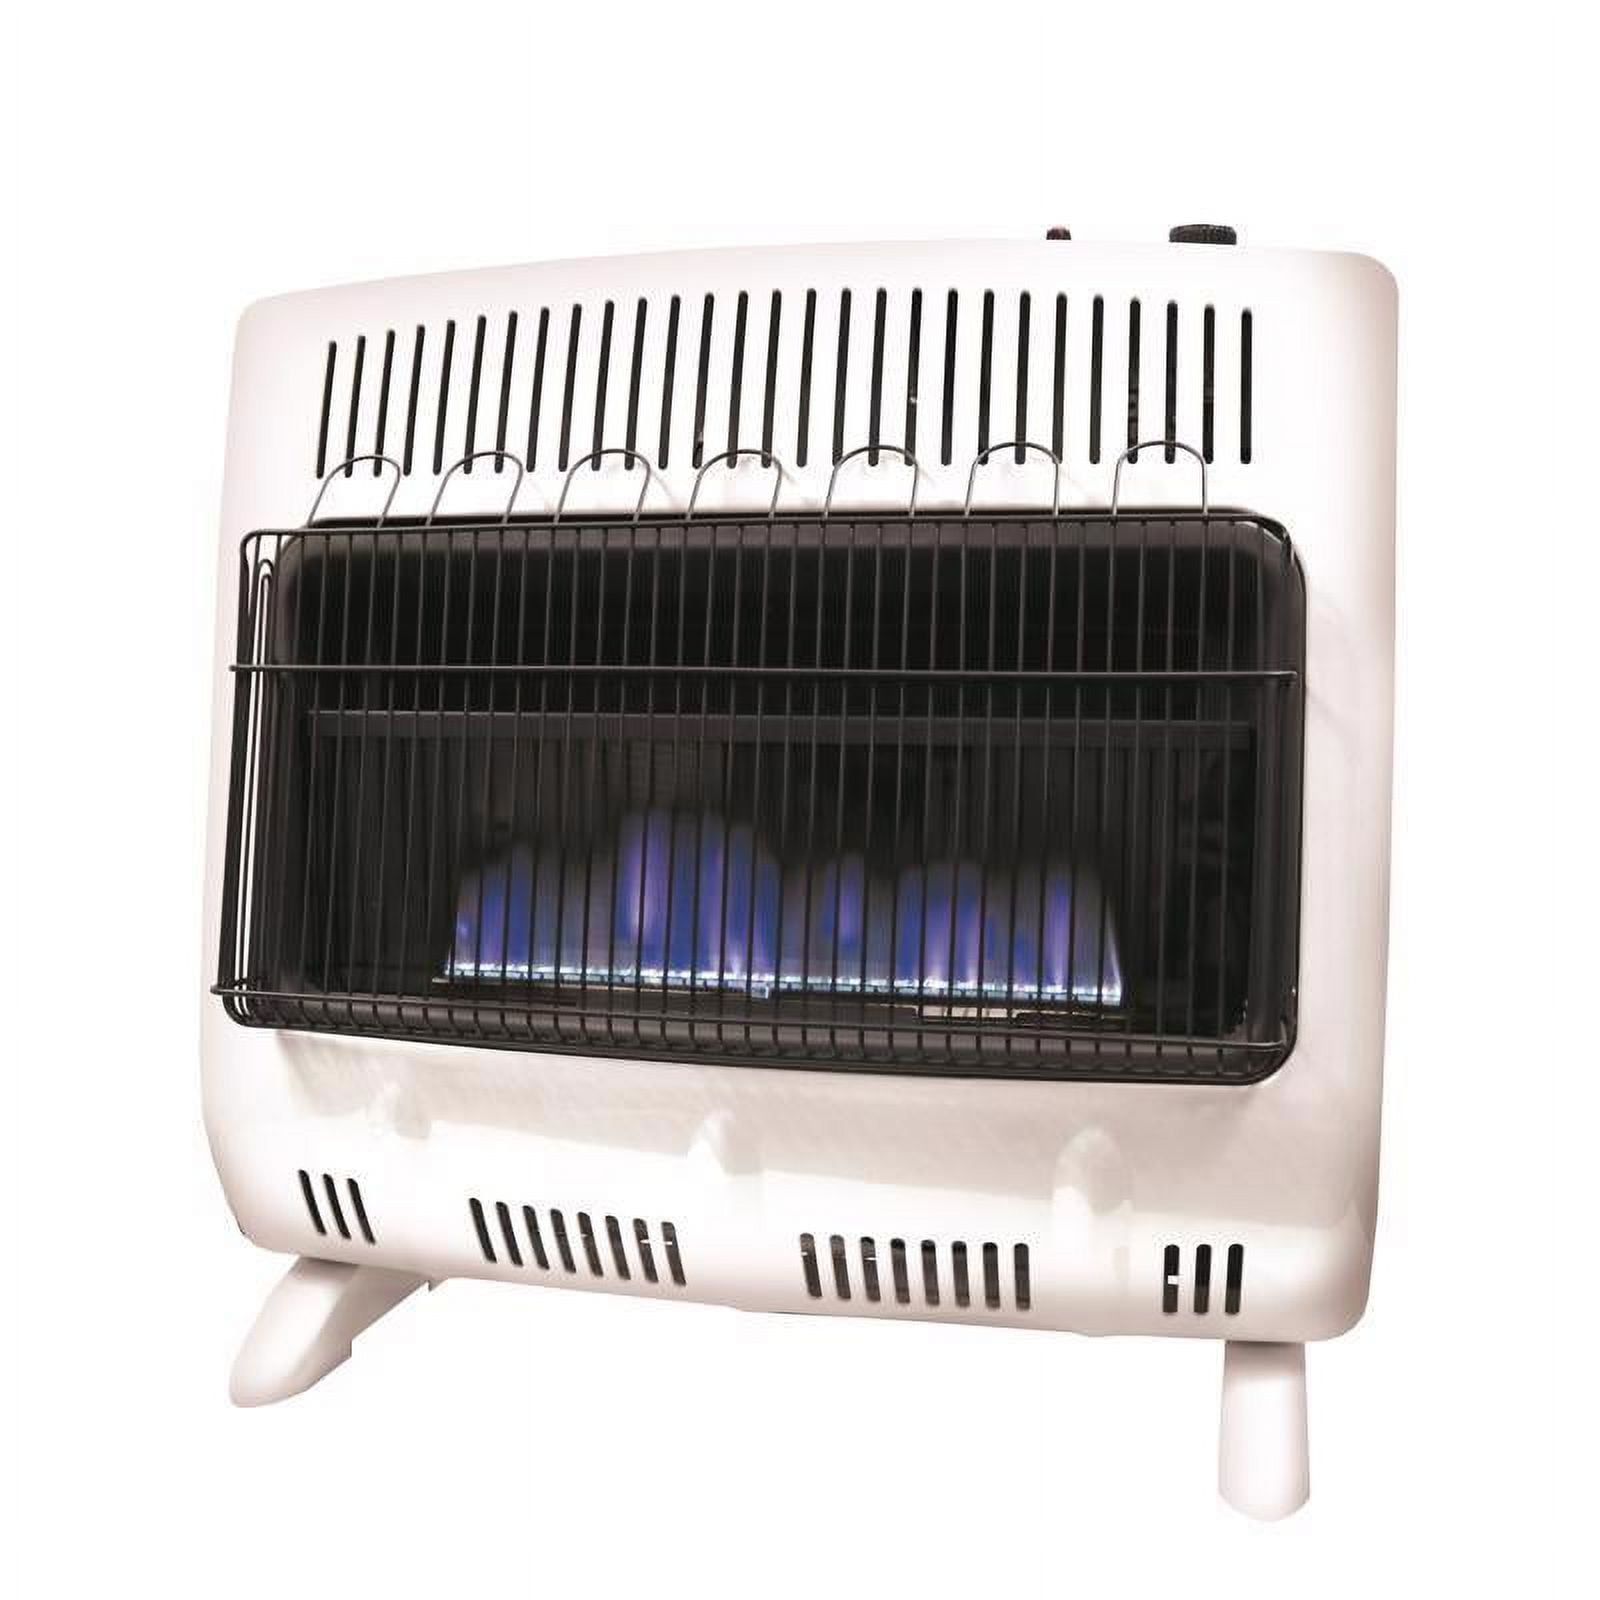 4009989 700 sq. ft. Comfort Collection 30000 BTU Natural Gas & Propane Wall Heater, White -  Mr. Heater